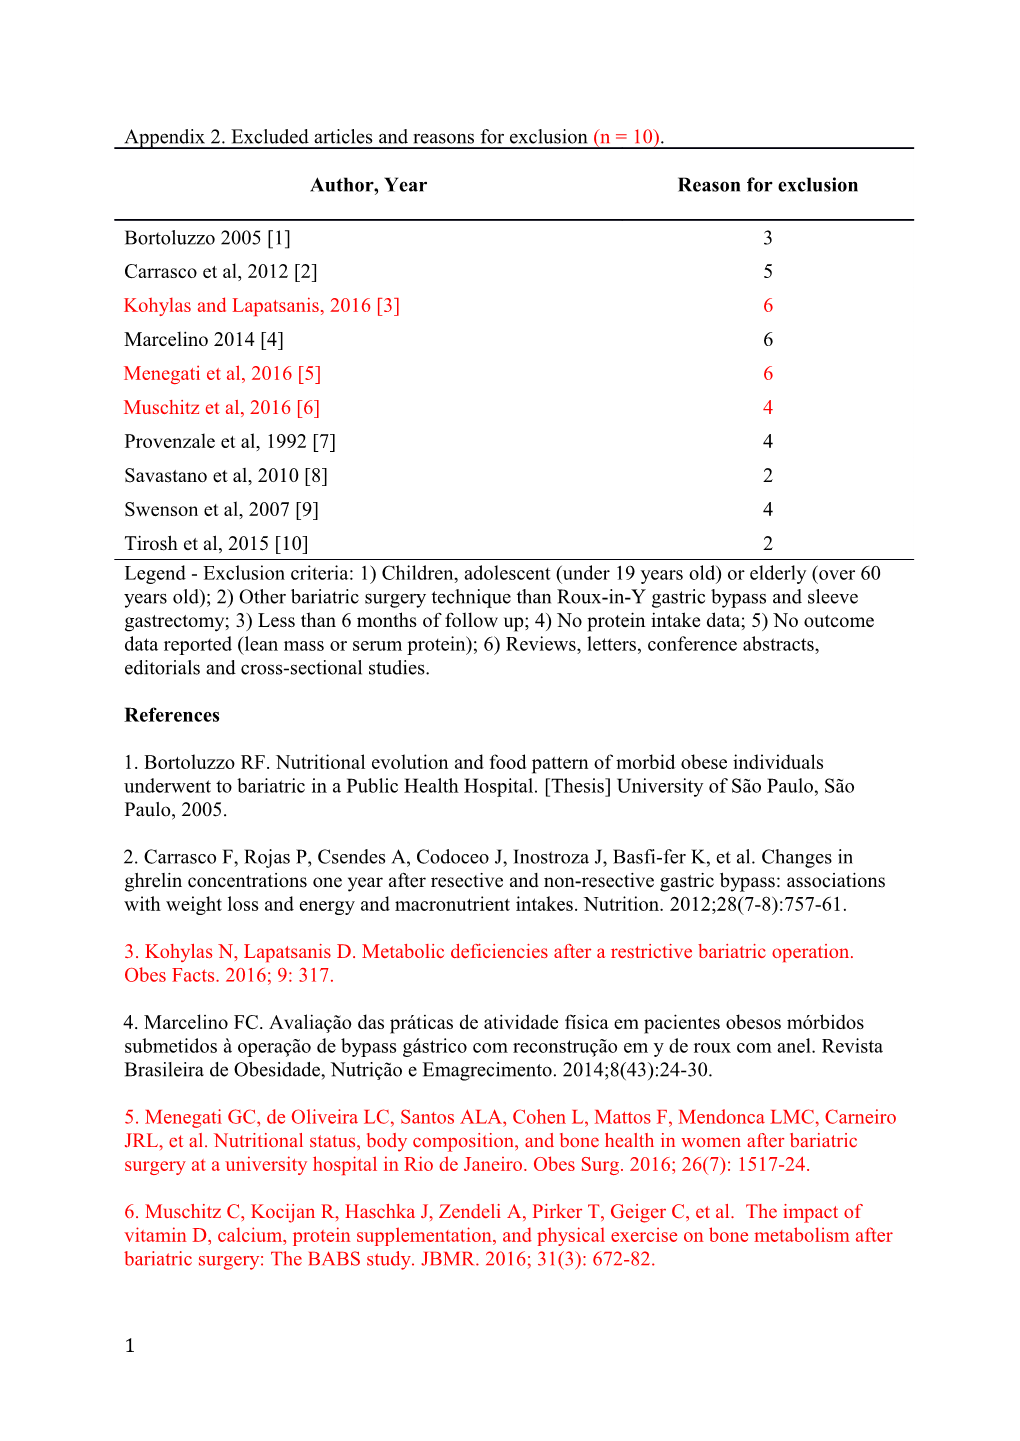 Appendix 2. Excluded Articles and Reasons for Exclusion (N = 10)